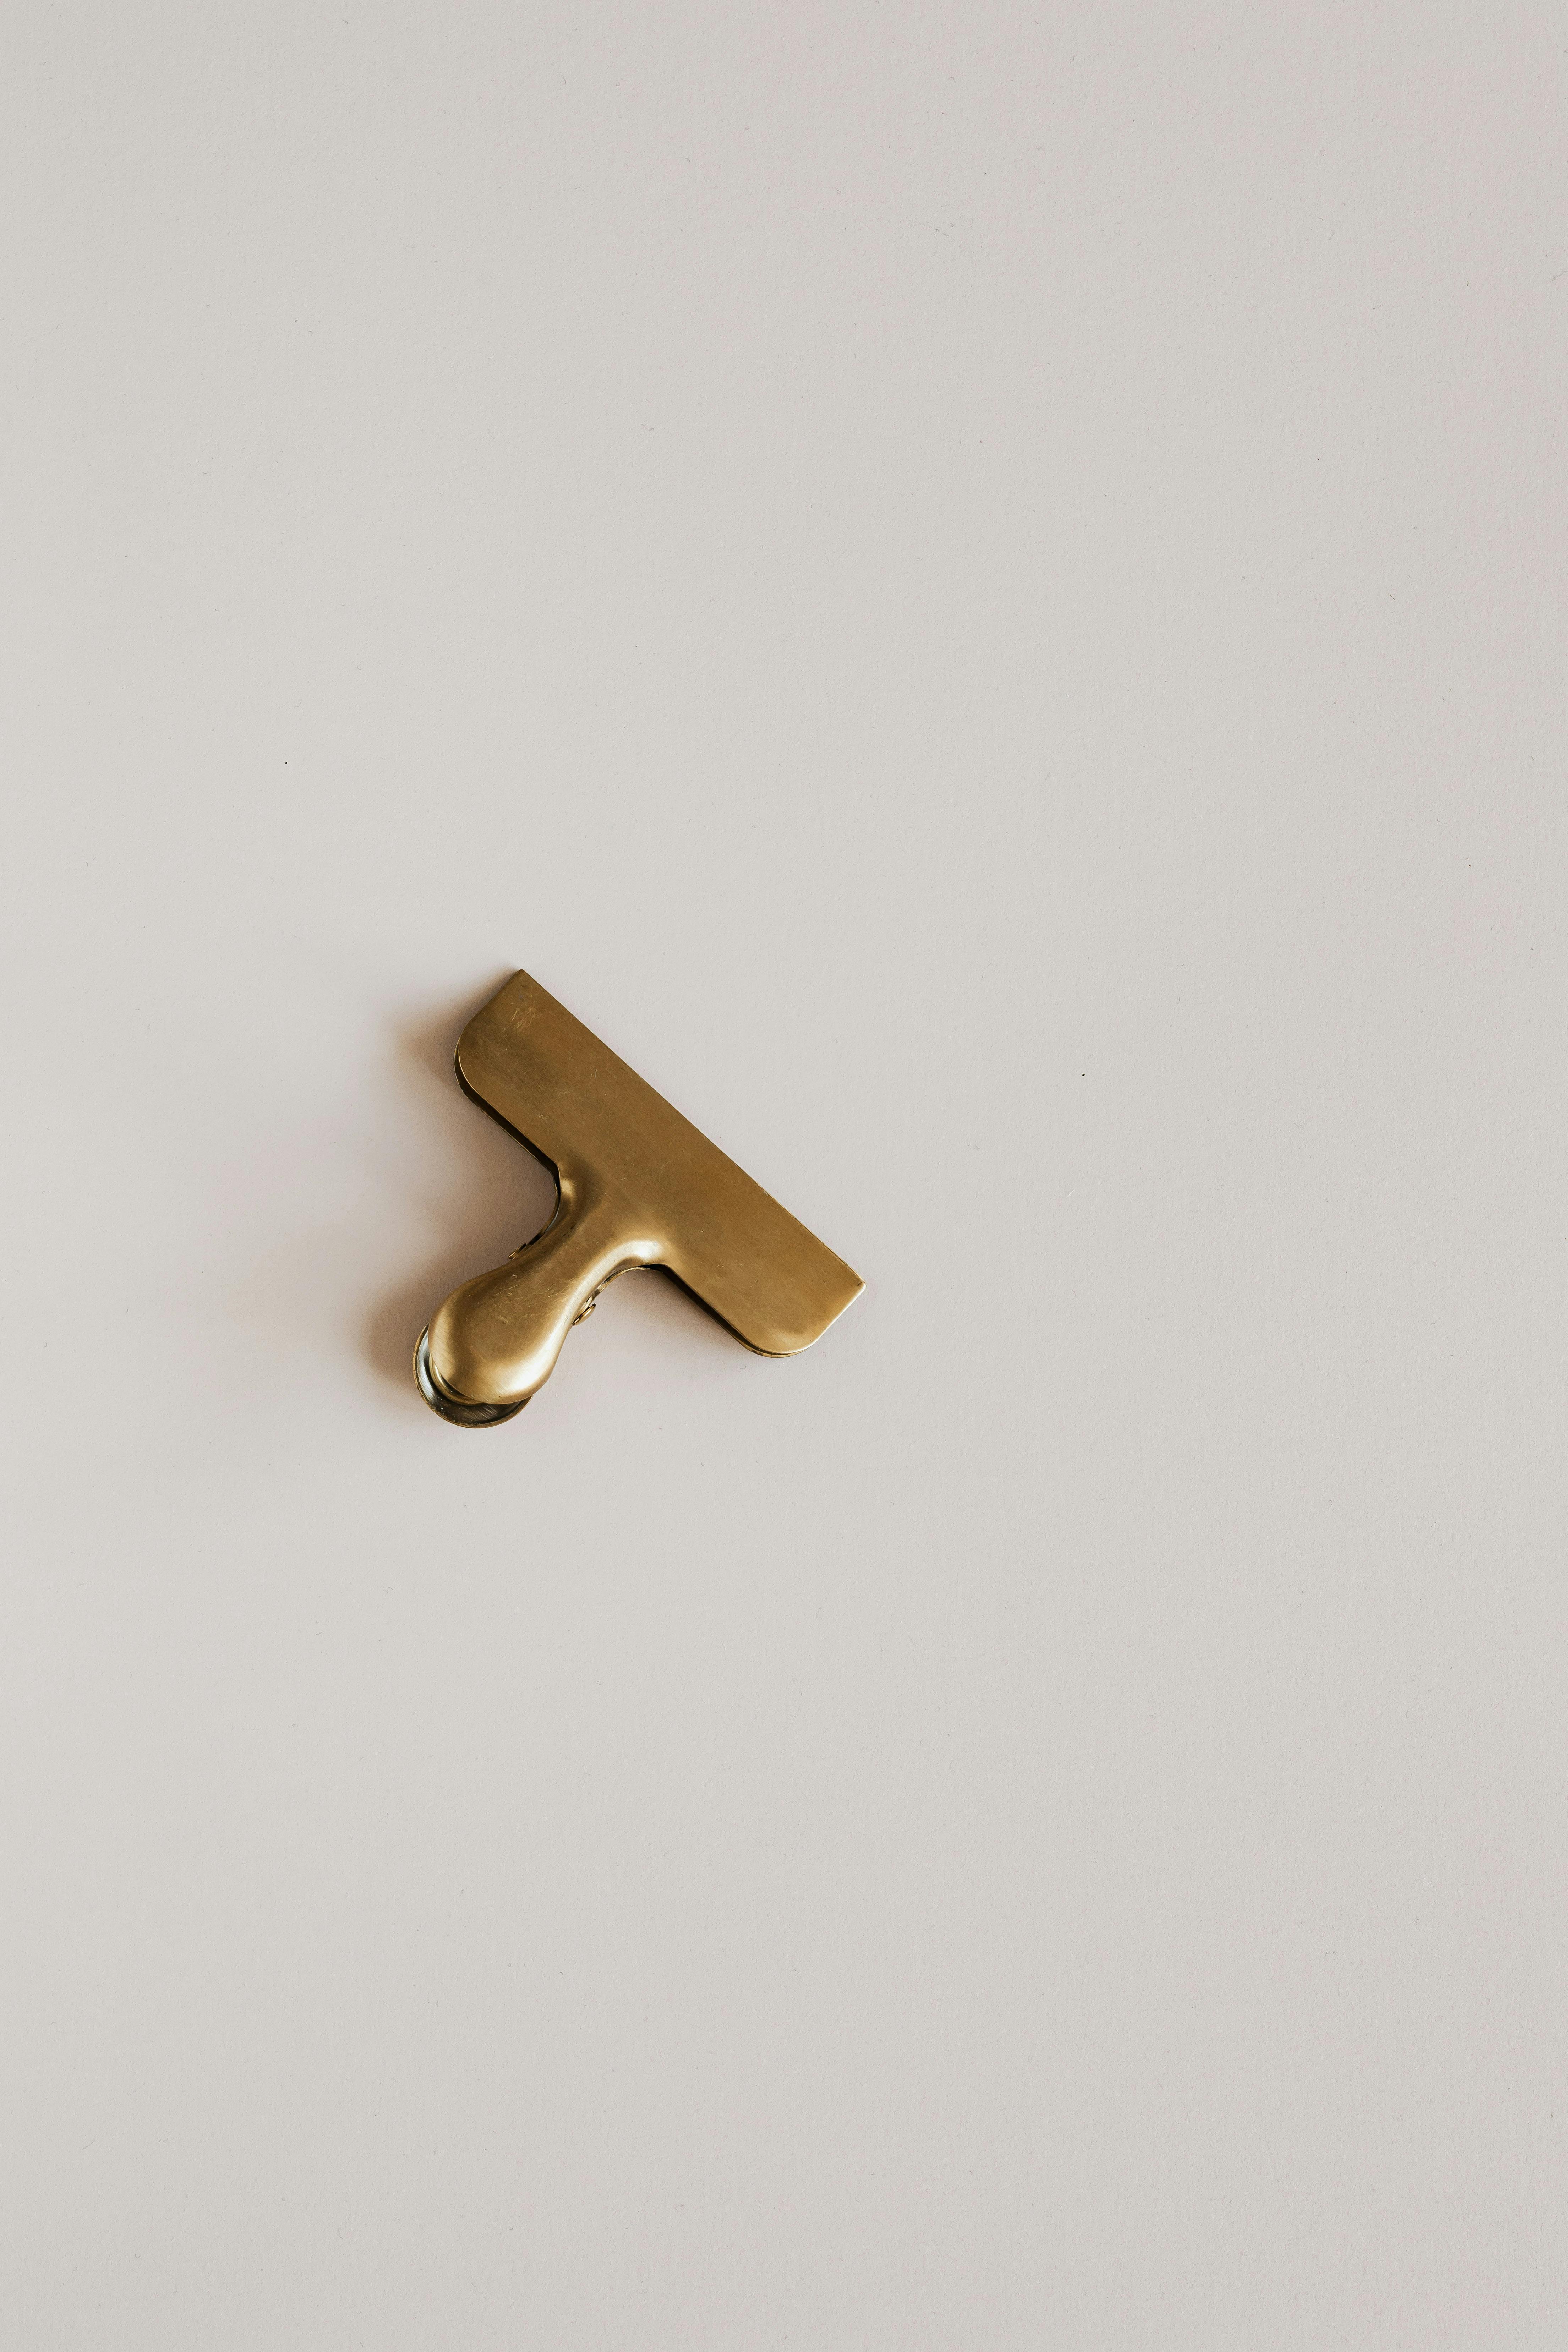 golden clip for papers on beige table